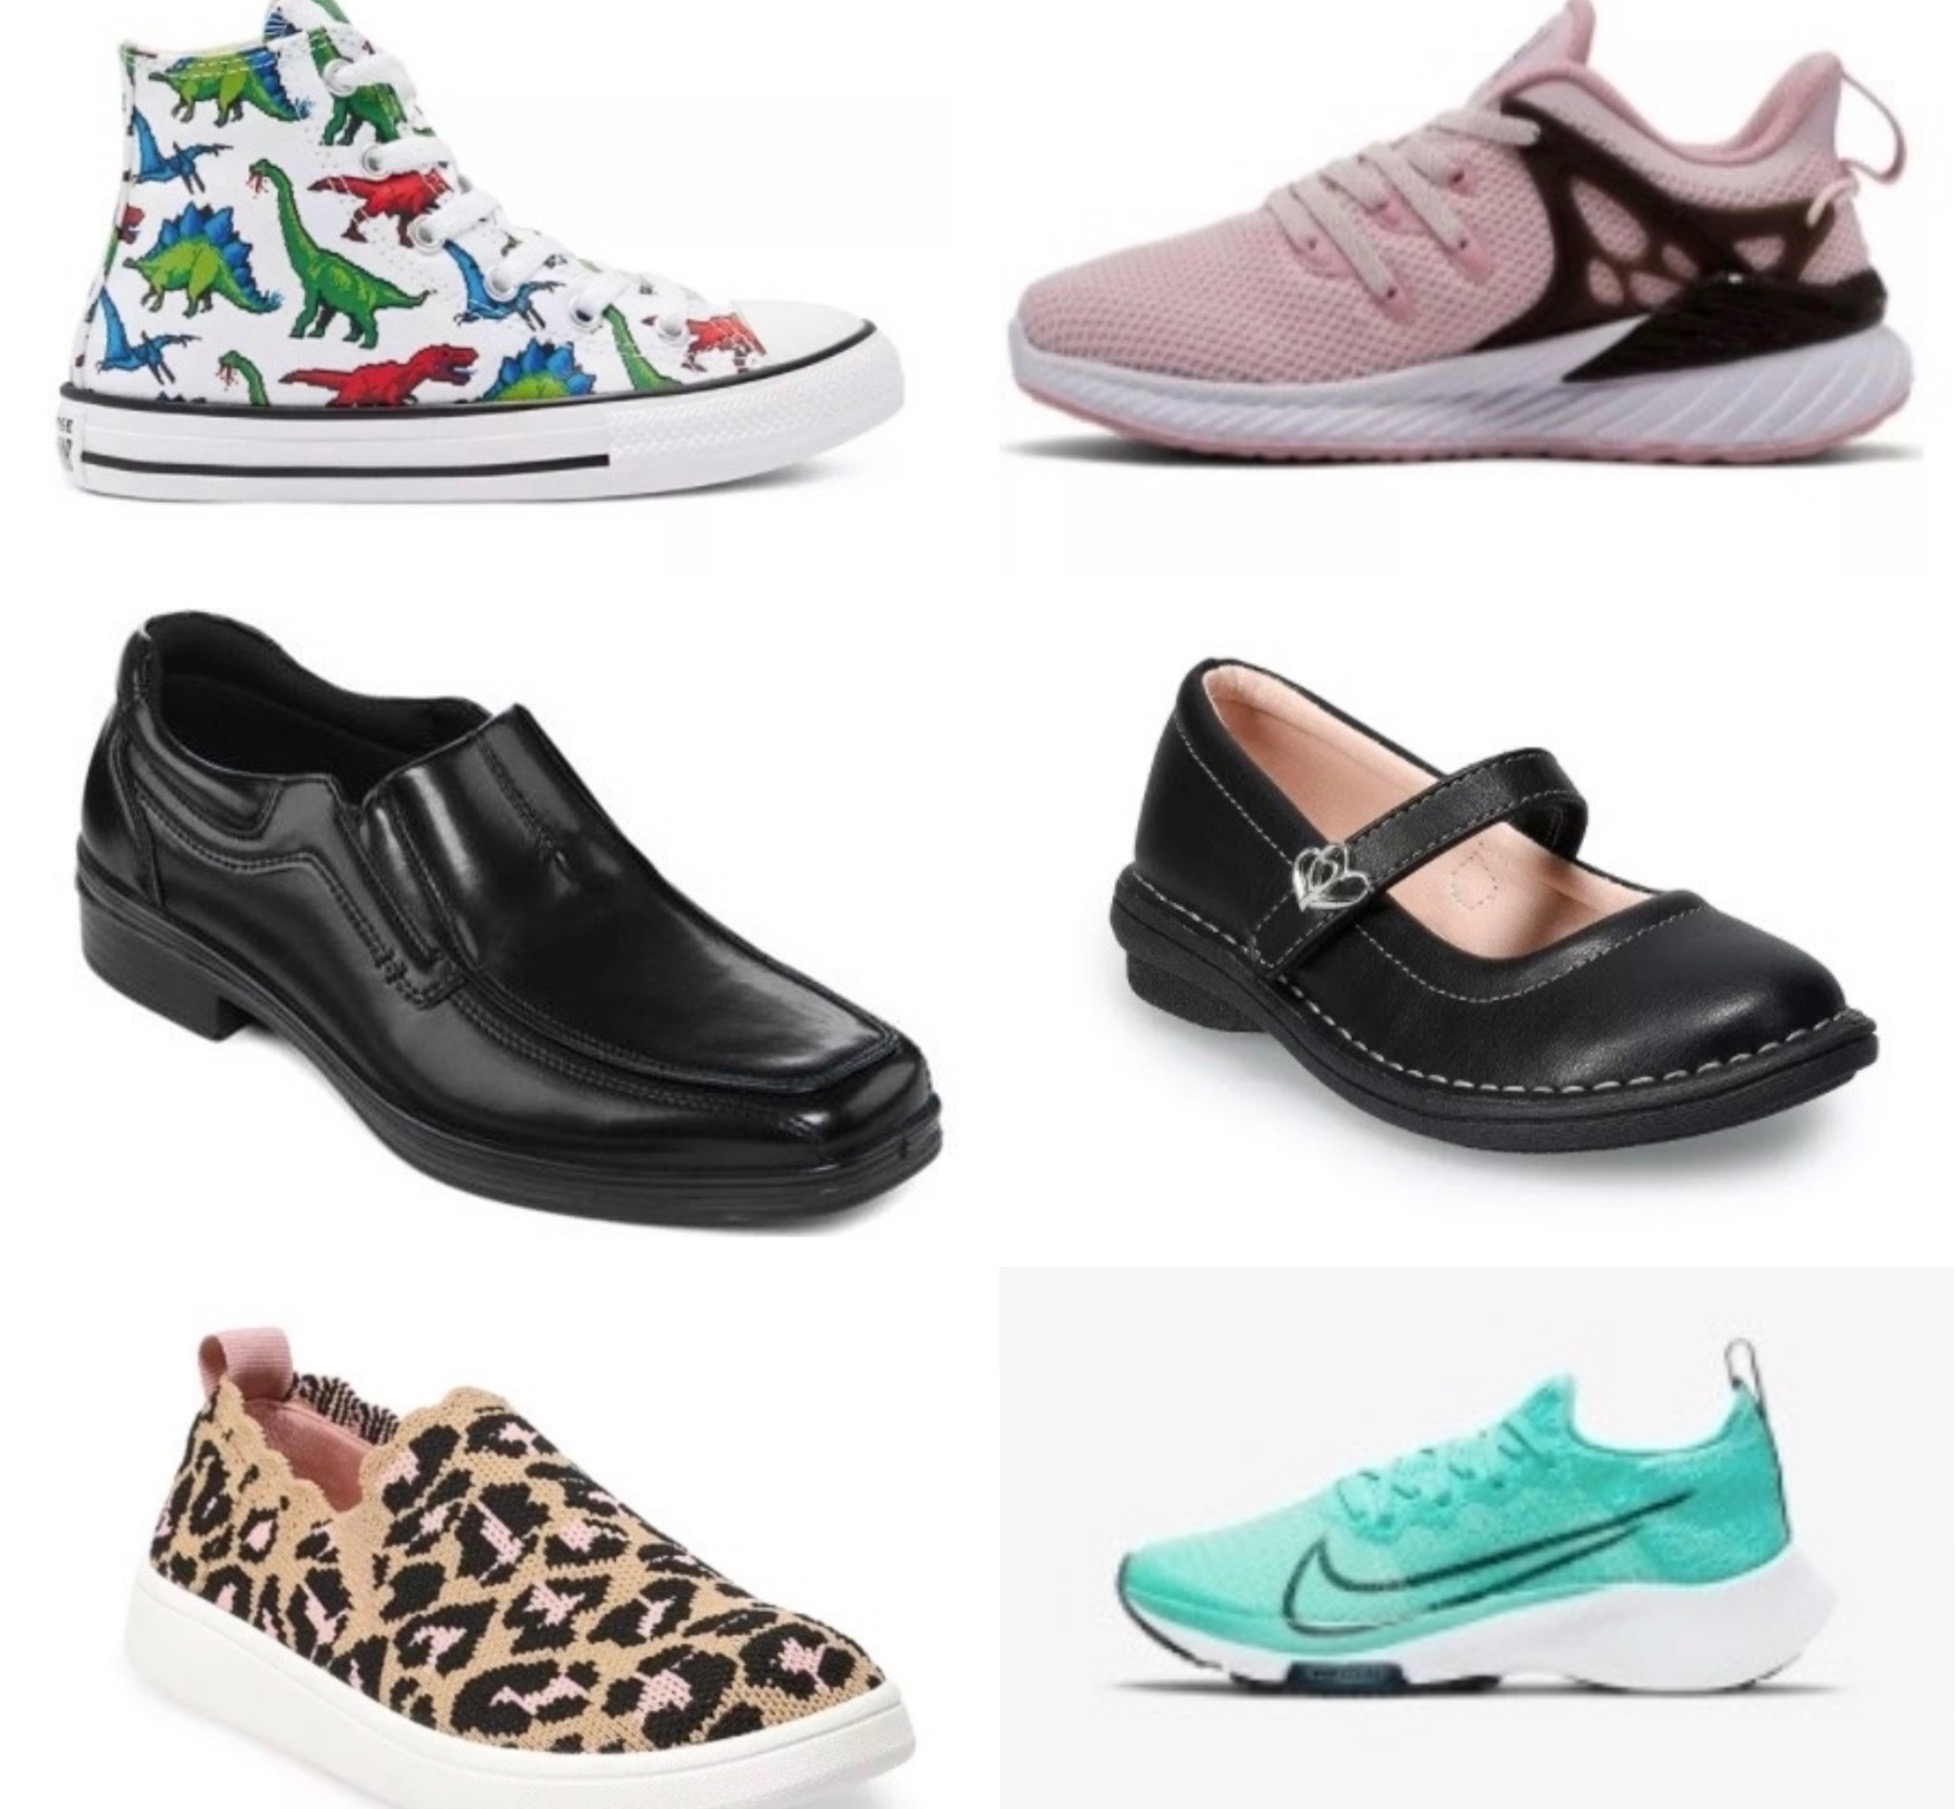 Macy's Great Shoe Sale is on now, get up to 40% off famous brands -  